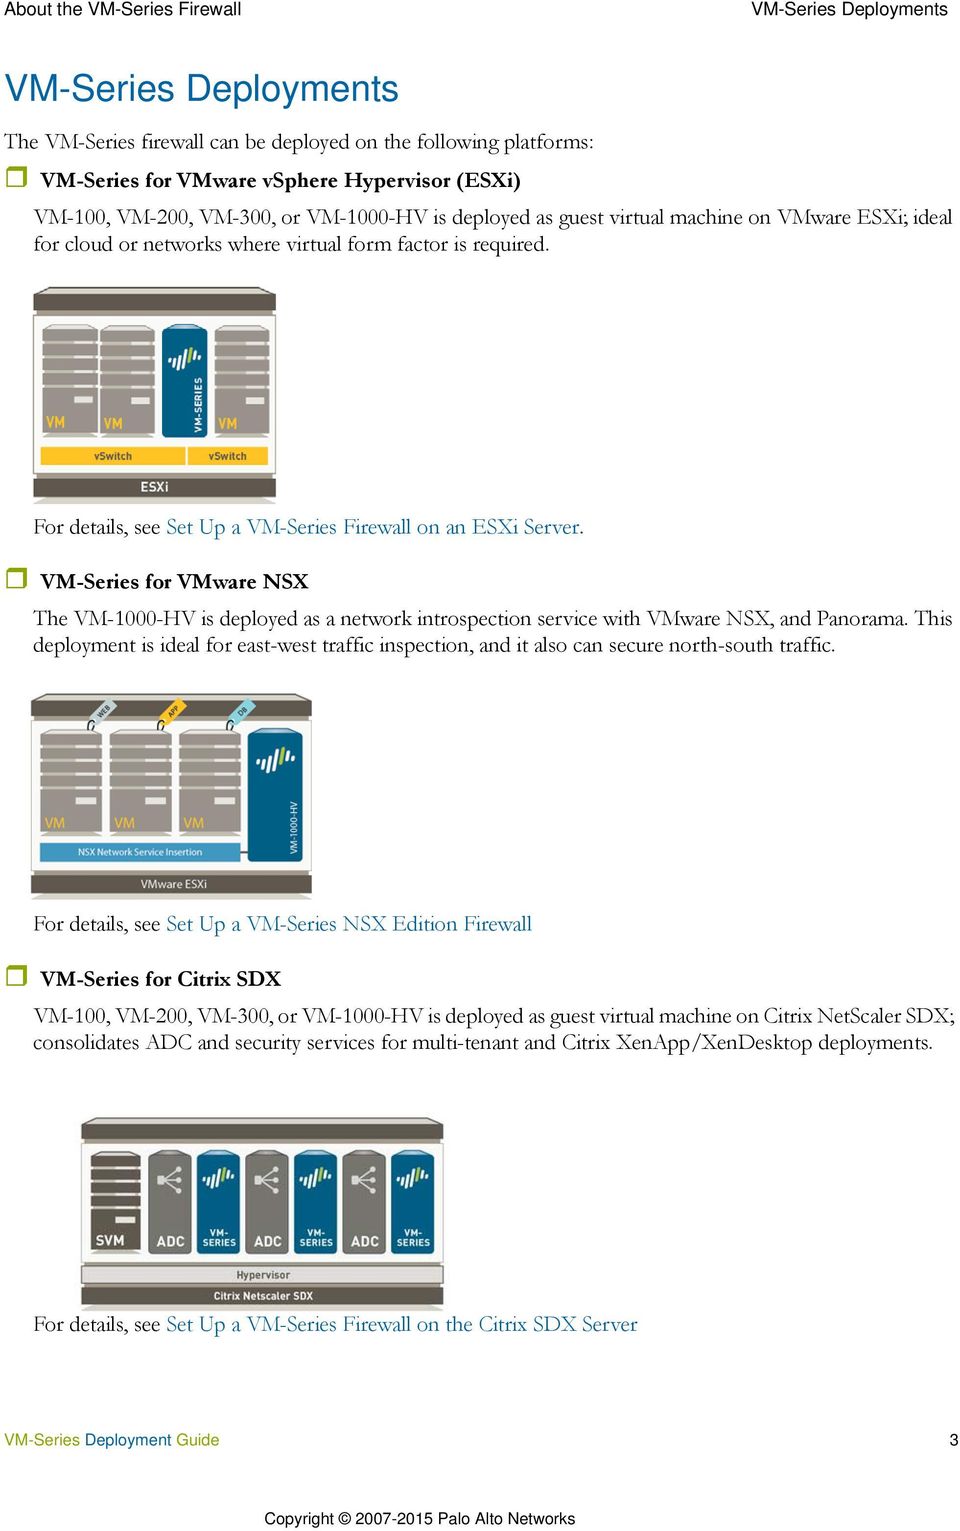 For details, see Set Up a VM-Series Firewall on an ESXi Server. VM-Series for VMware NSX The VM-1000-HV is deployed as a network introspection service with VMware NSX, and Panorama.